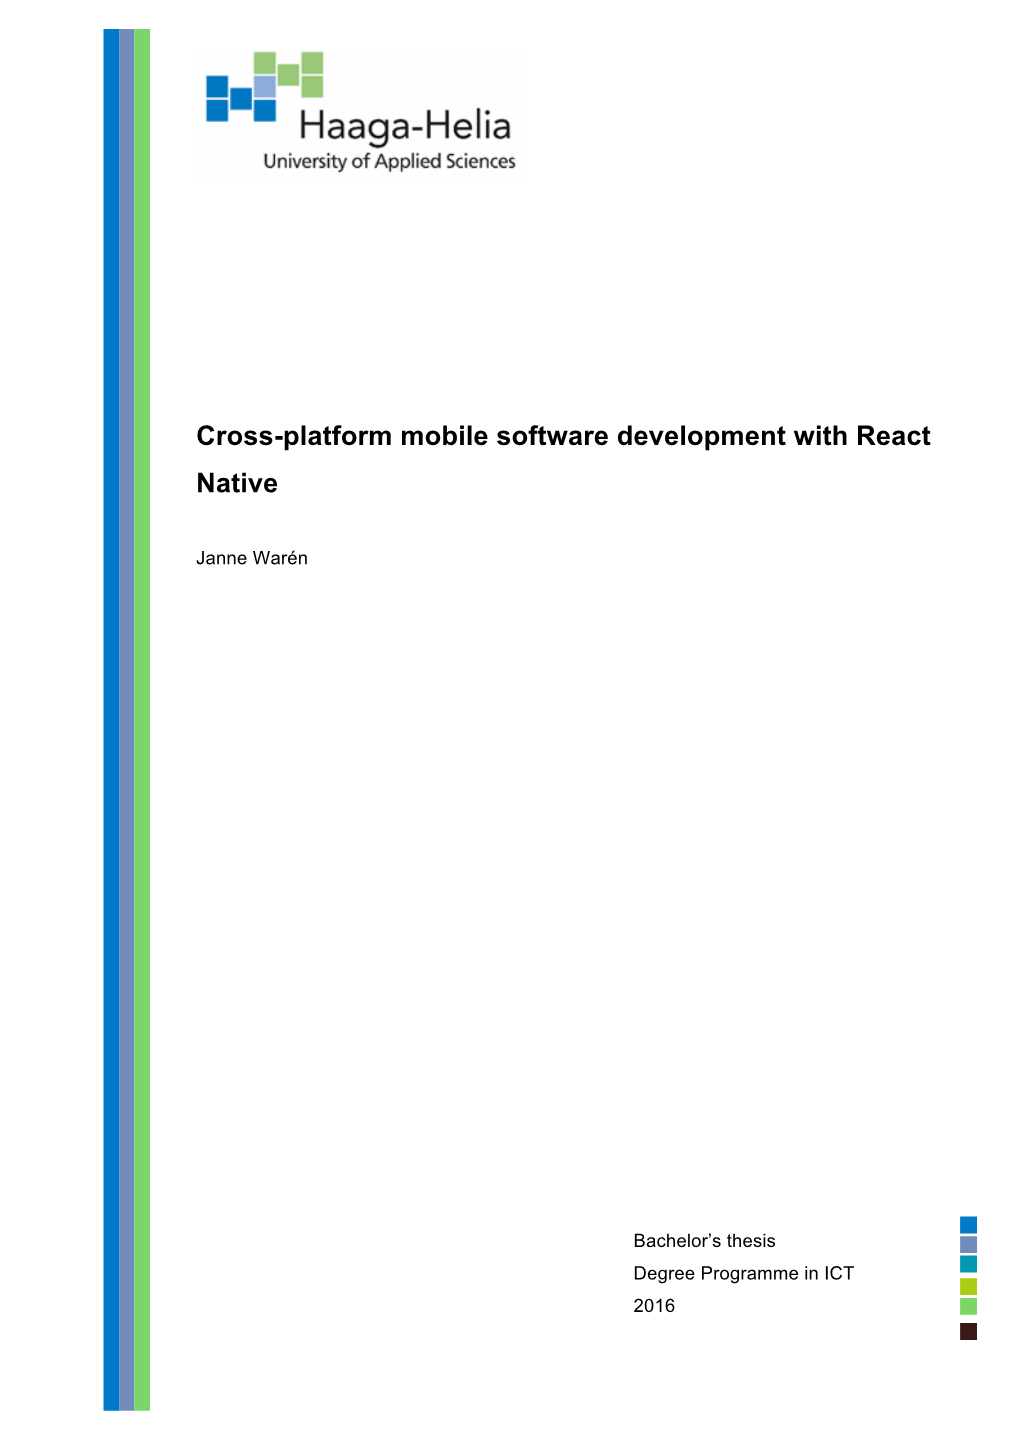 Cross-Platform Mobile Software Development with React Native Pages and Ap- Pendix Pages 27 + 0